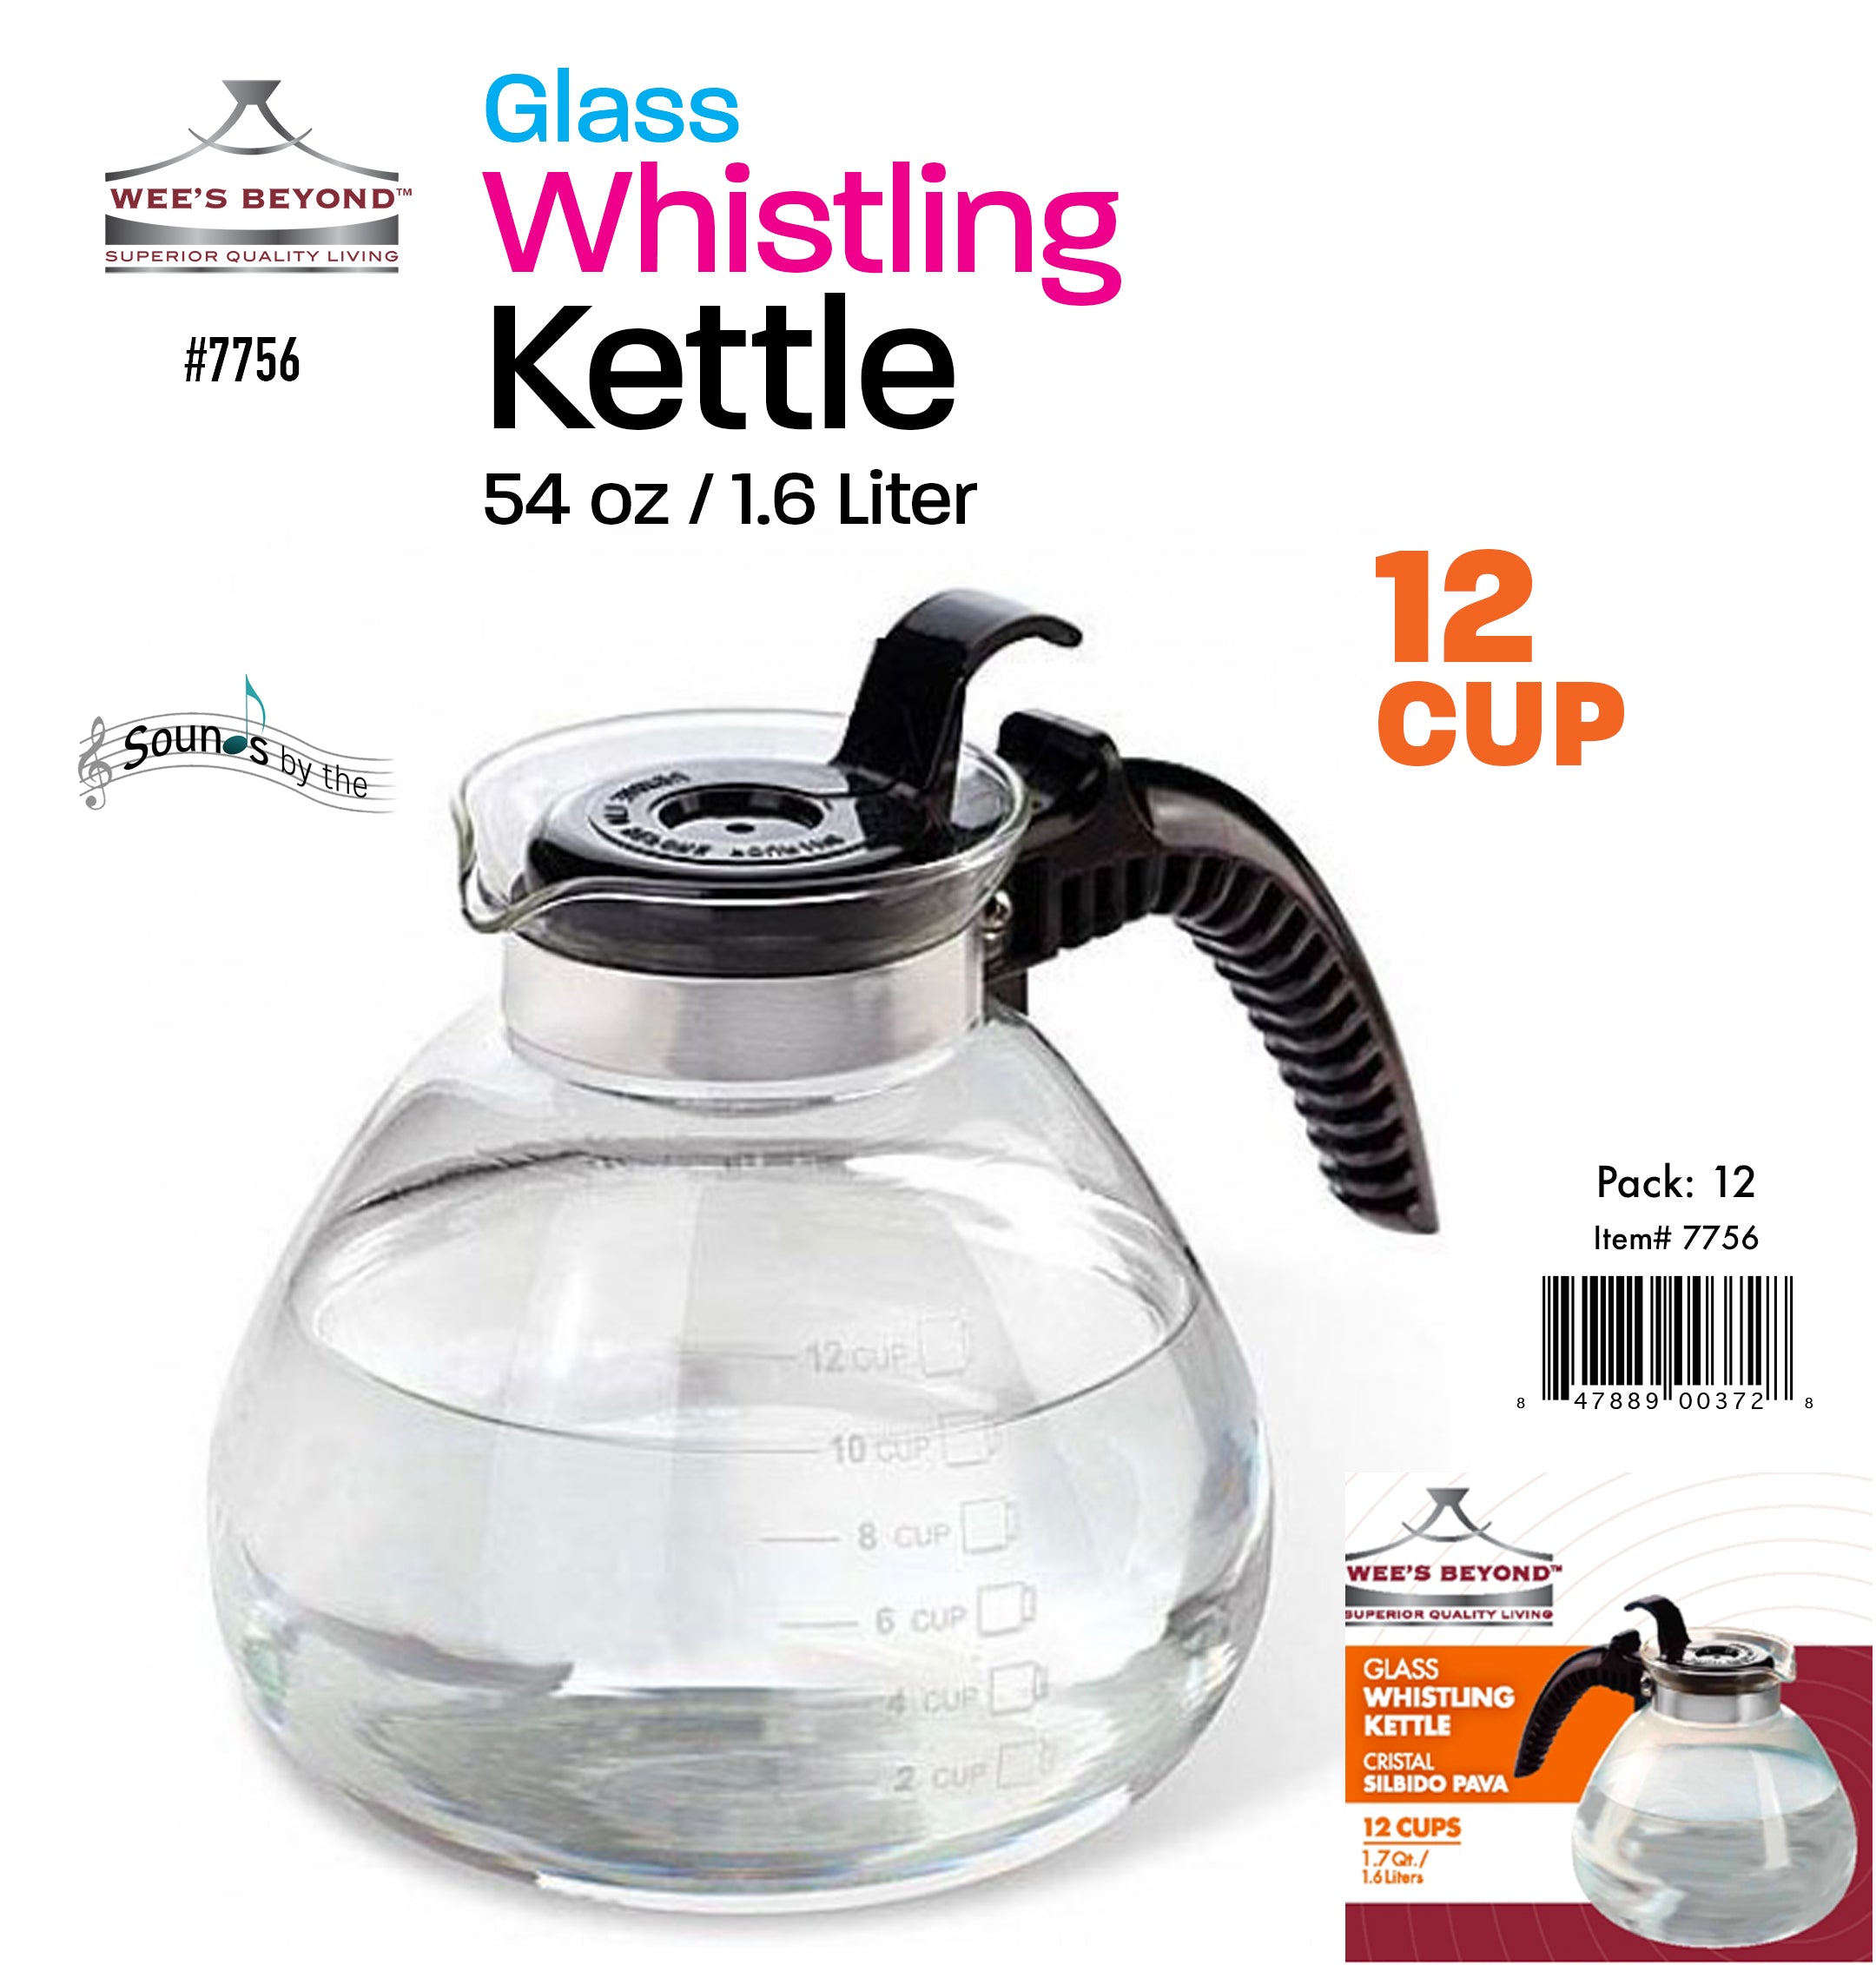 7756 Stove Top Glass Whistling Kettle 12 Cups (case pack 12 pcs